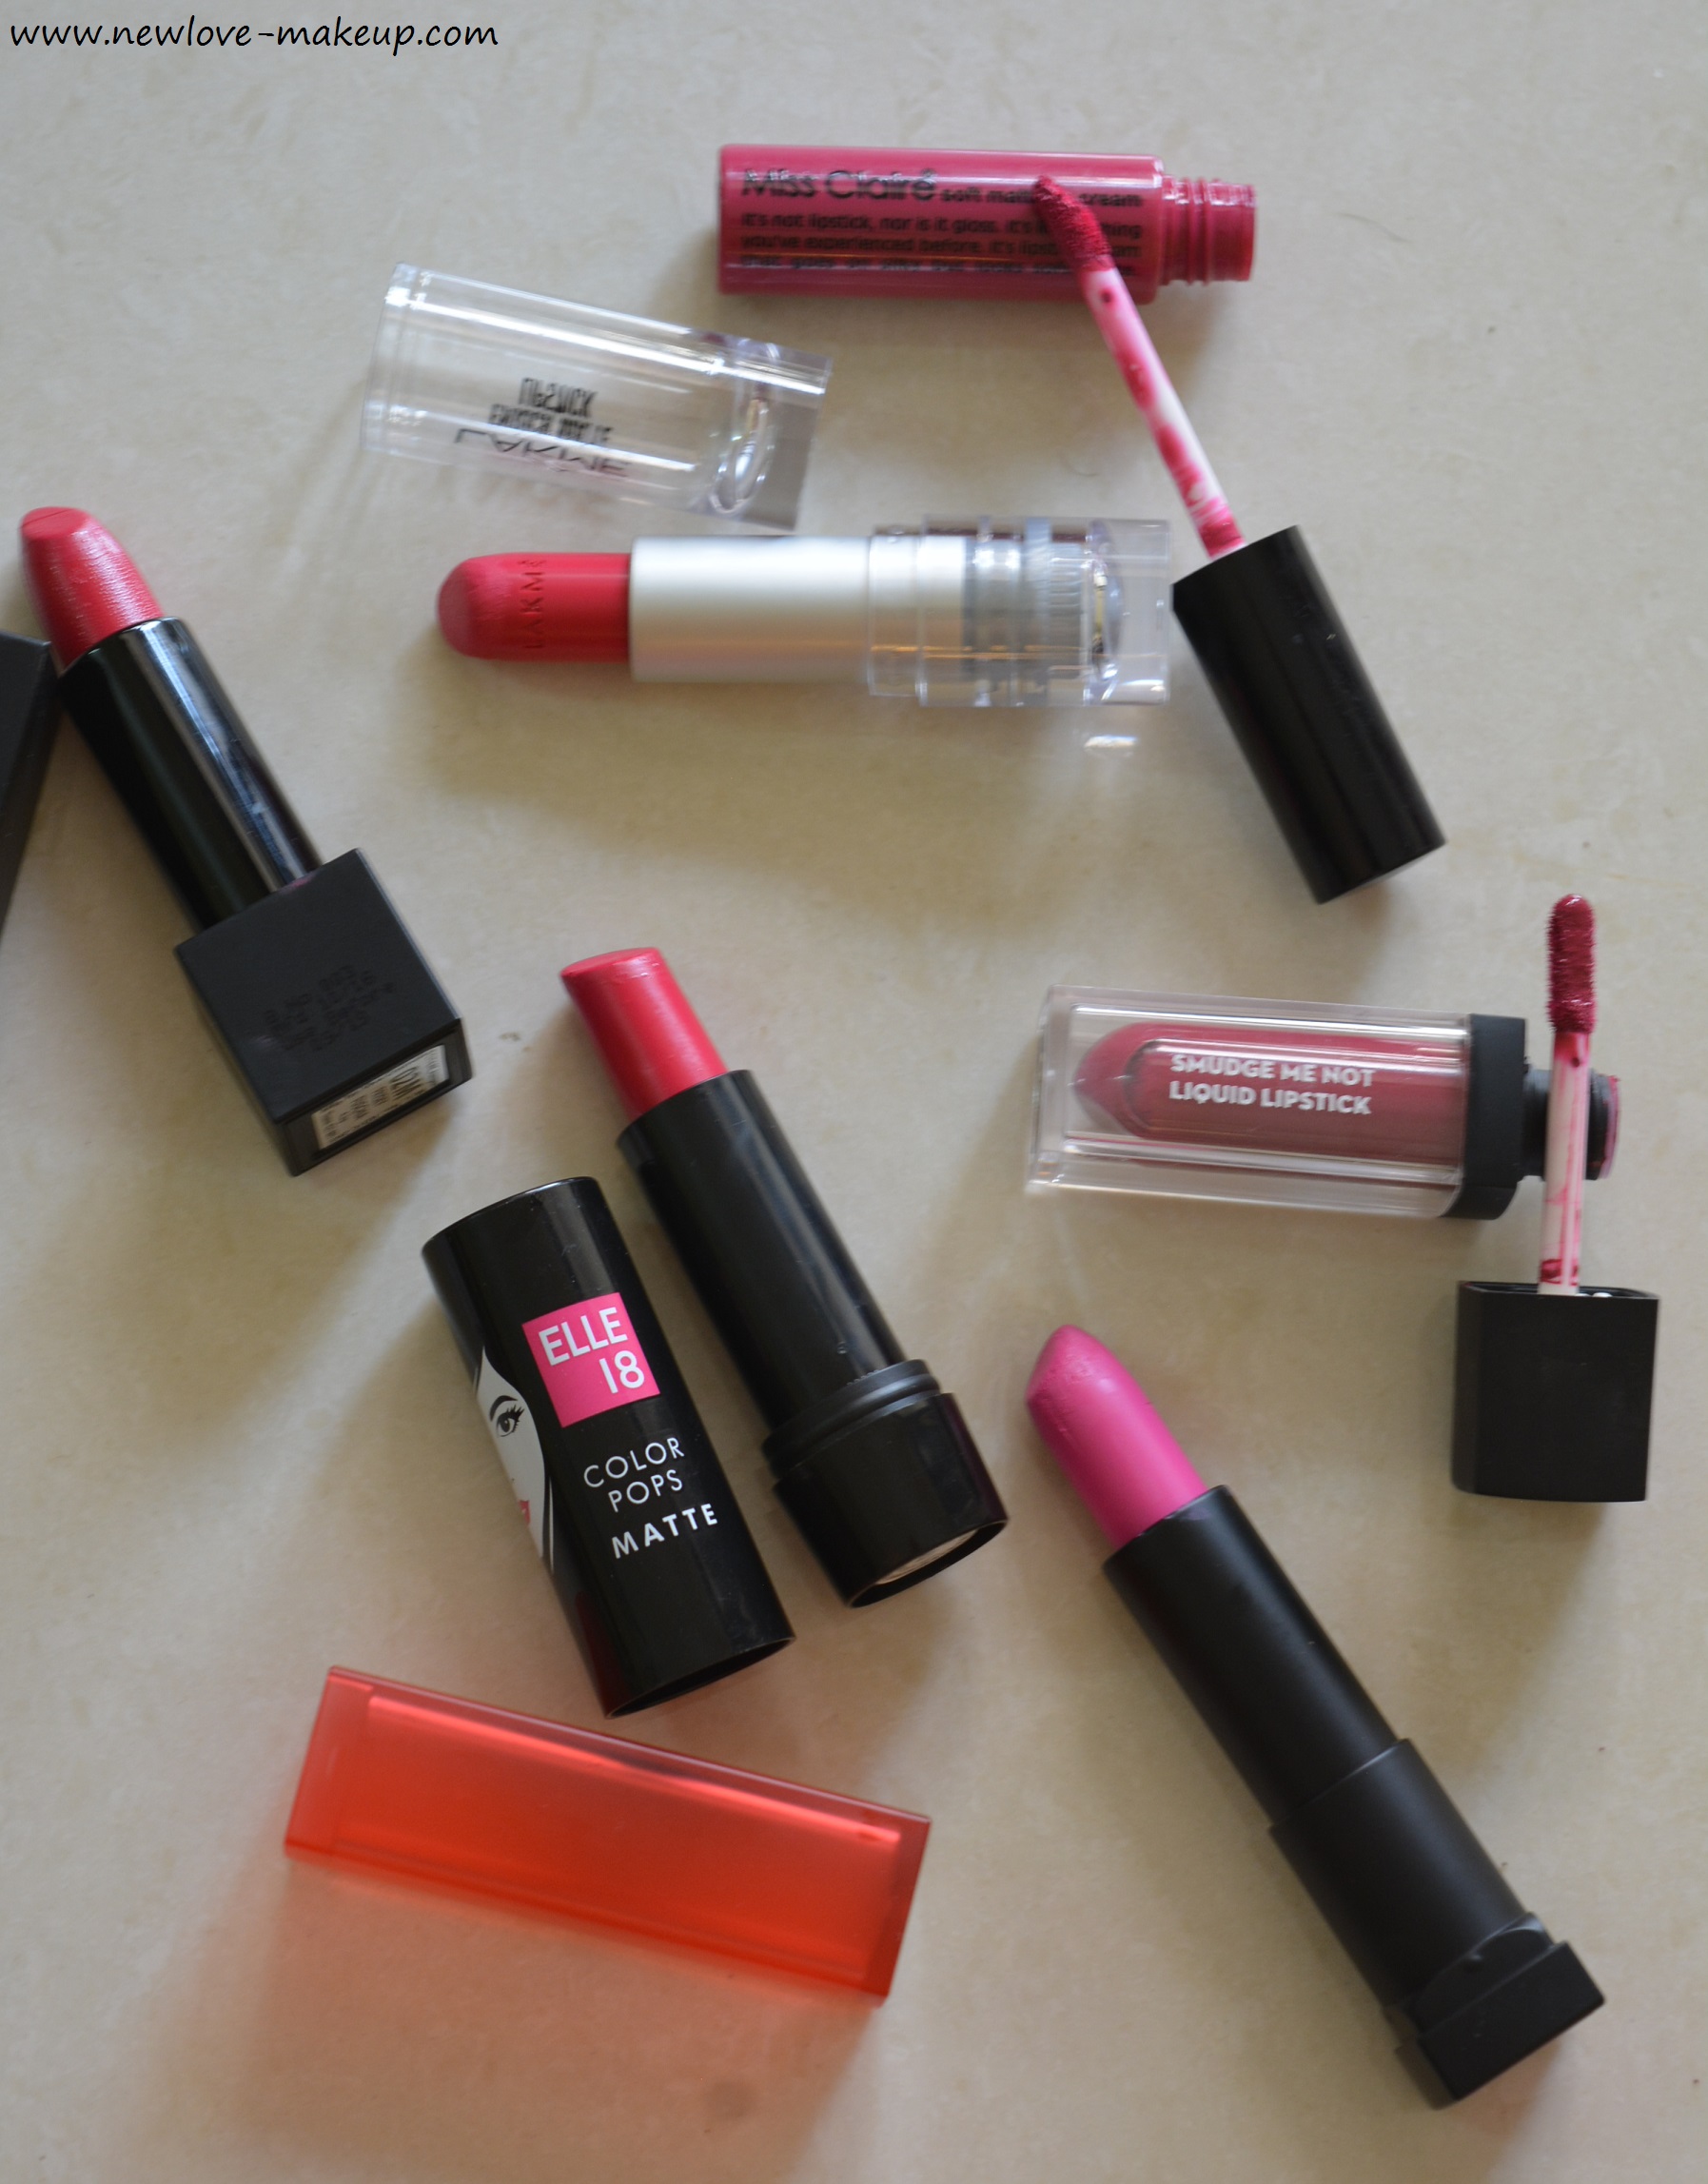 Top 6 Matte Pink Lipsticks under Rs.500 in India | Swatches | Giveaway